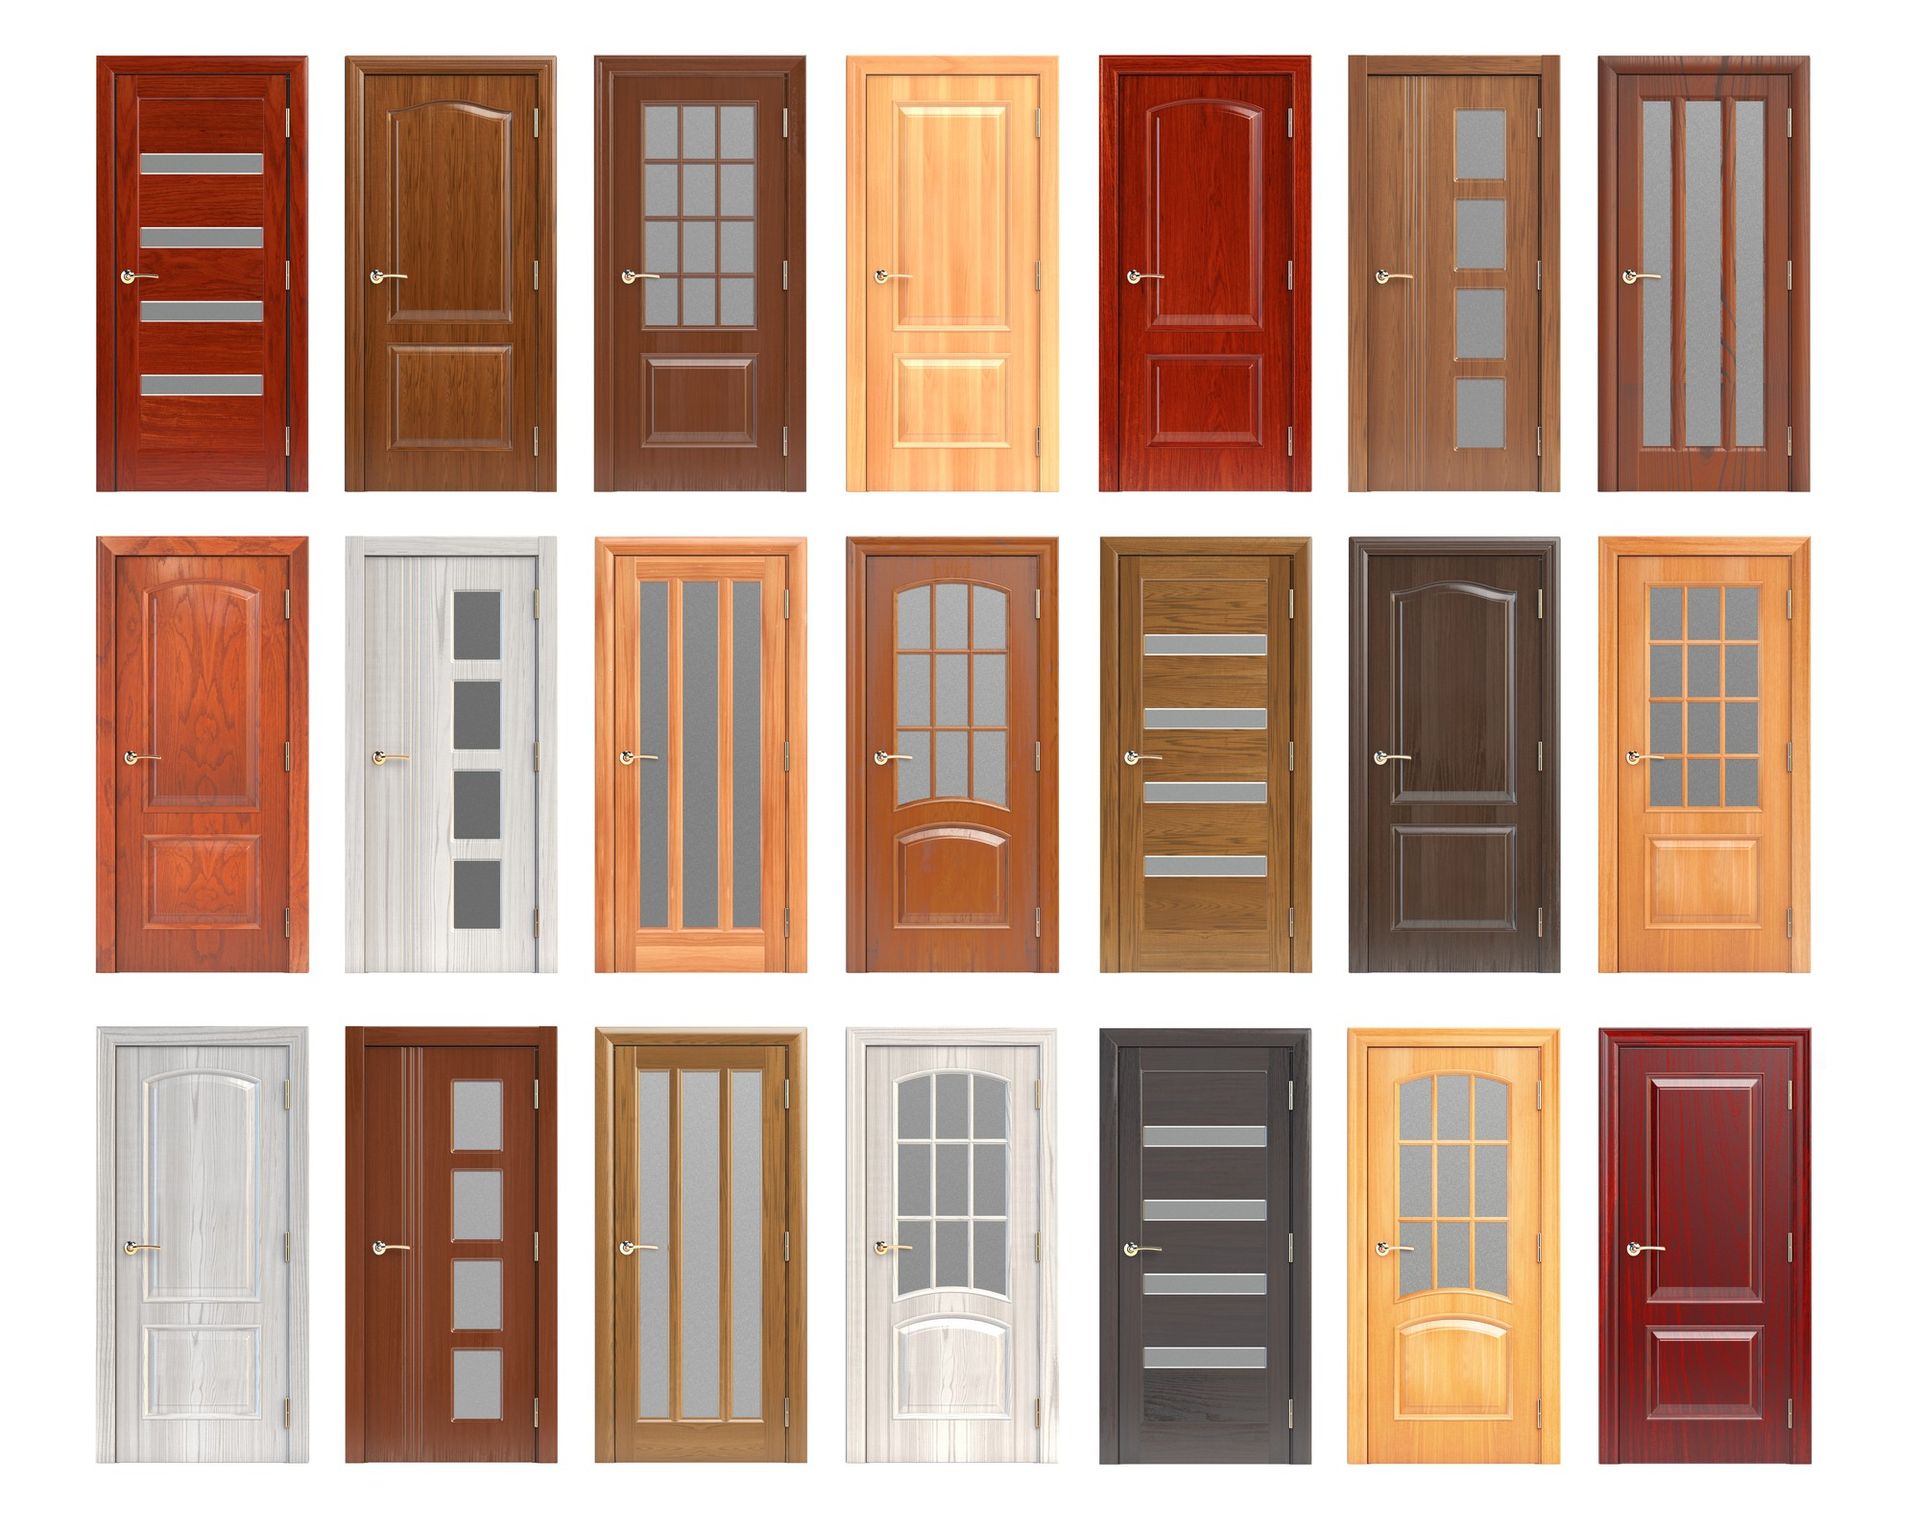 there are many different types of doors in different colors